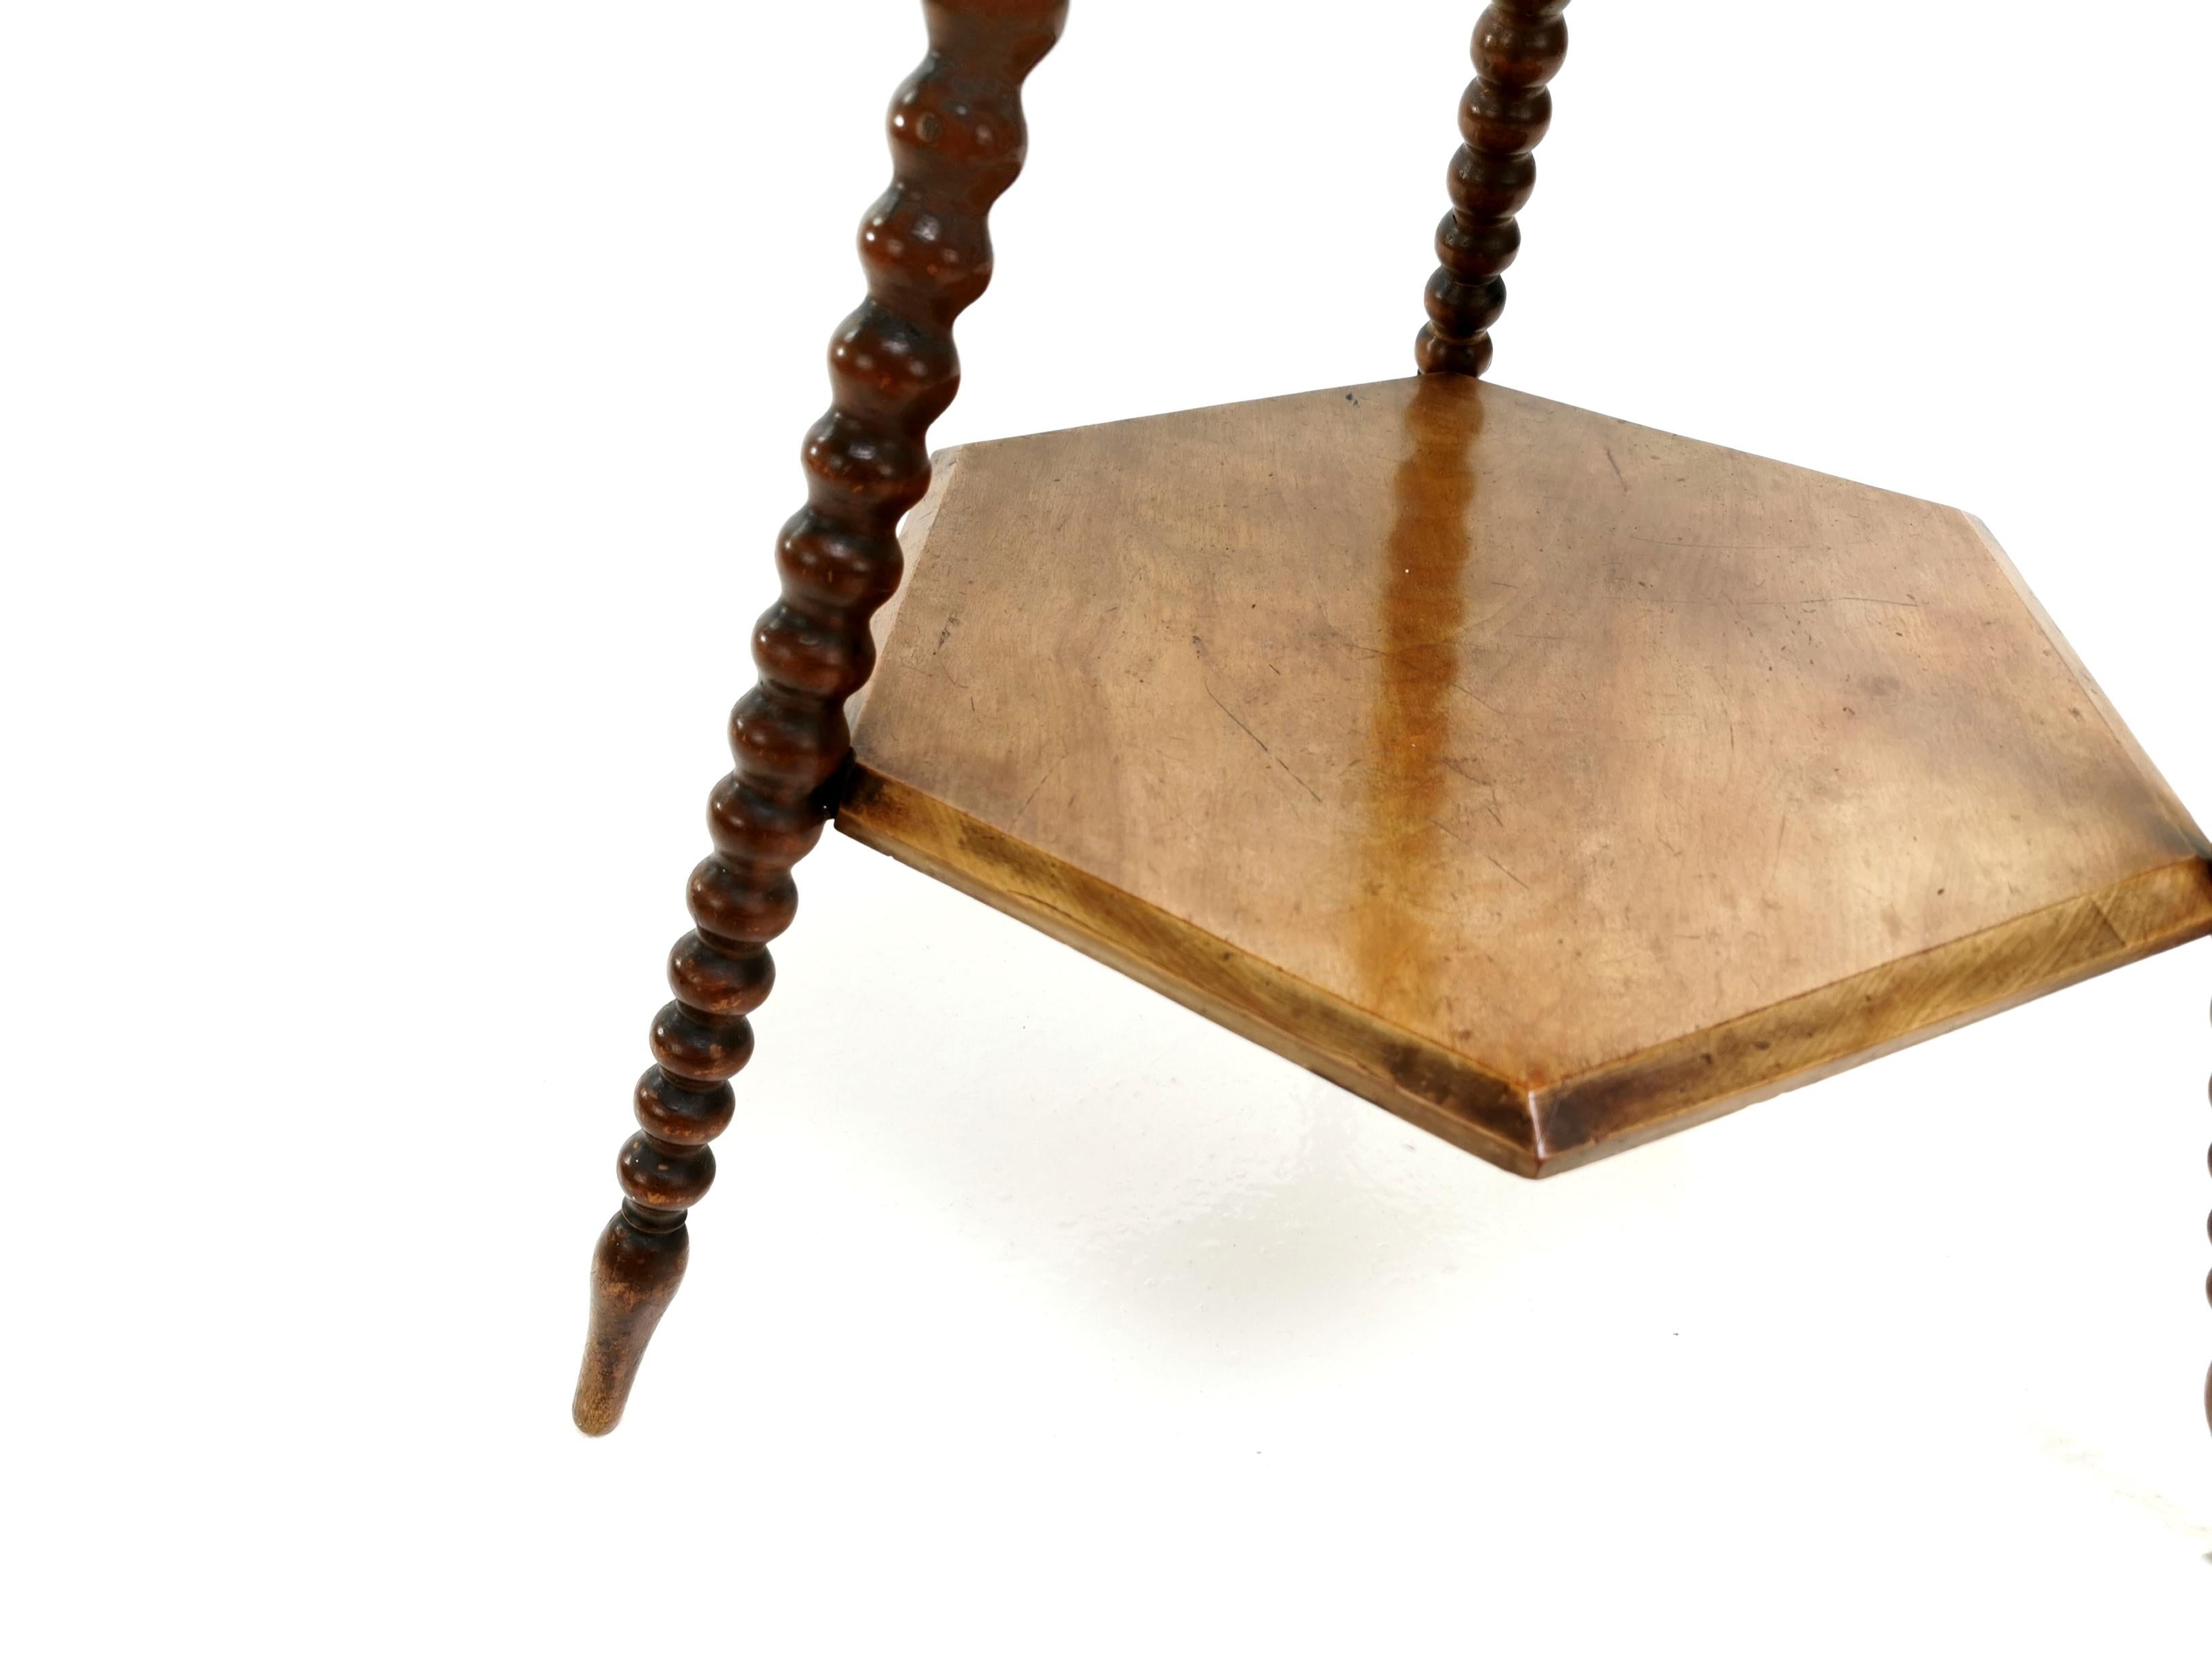 Antique lamp table

A Victorian walnut lamp table with bobbin turned legs lozenge-shaped under tier with octagonal tabletop above. 

Condition:

With wearing consistent with age and use. Original wear and patina. Repair pictured.